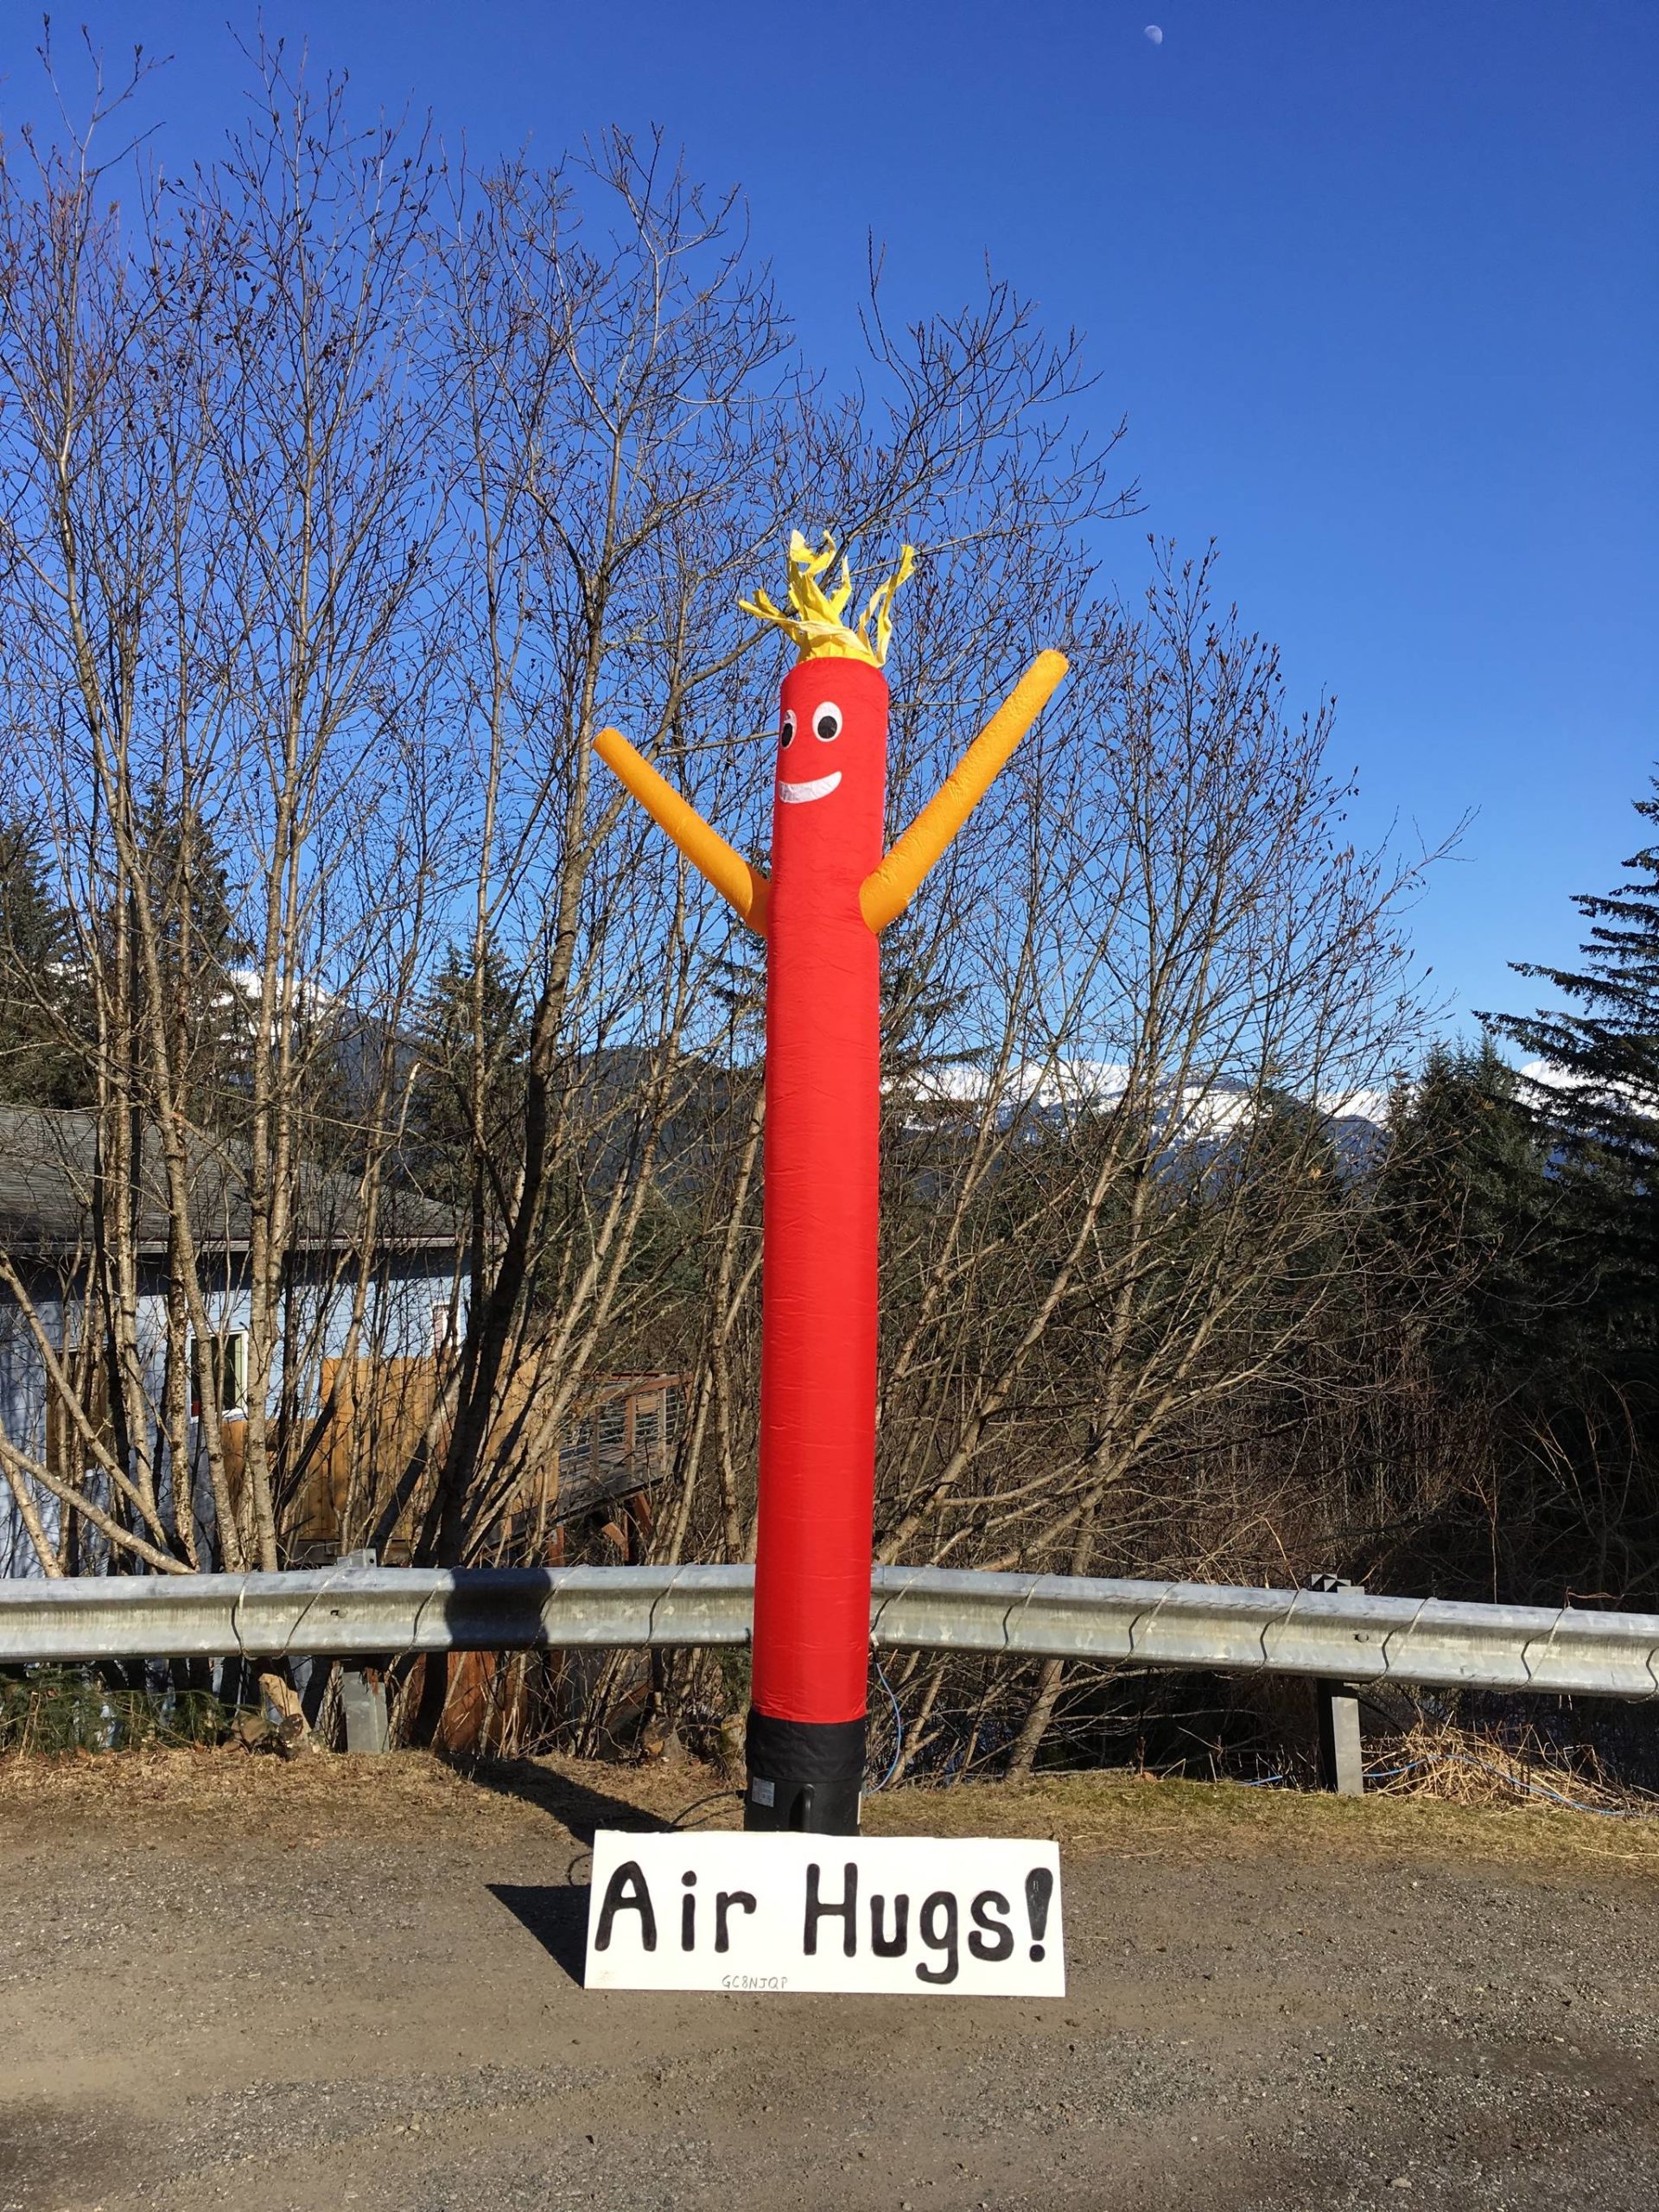 This inflatable fellow offers air hugs on Engineers Cutoff Road in this photo shared Monday. “This event happens every day from 3-5 p.m.,” wrote Suki Patterson. (Courtesy Photo | Suki Patterson)